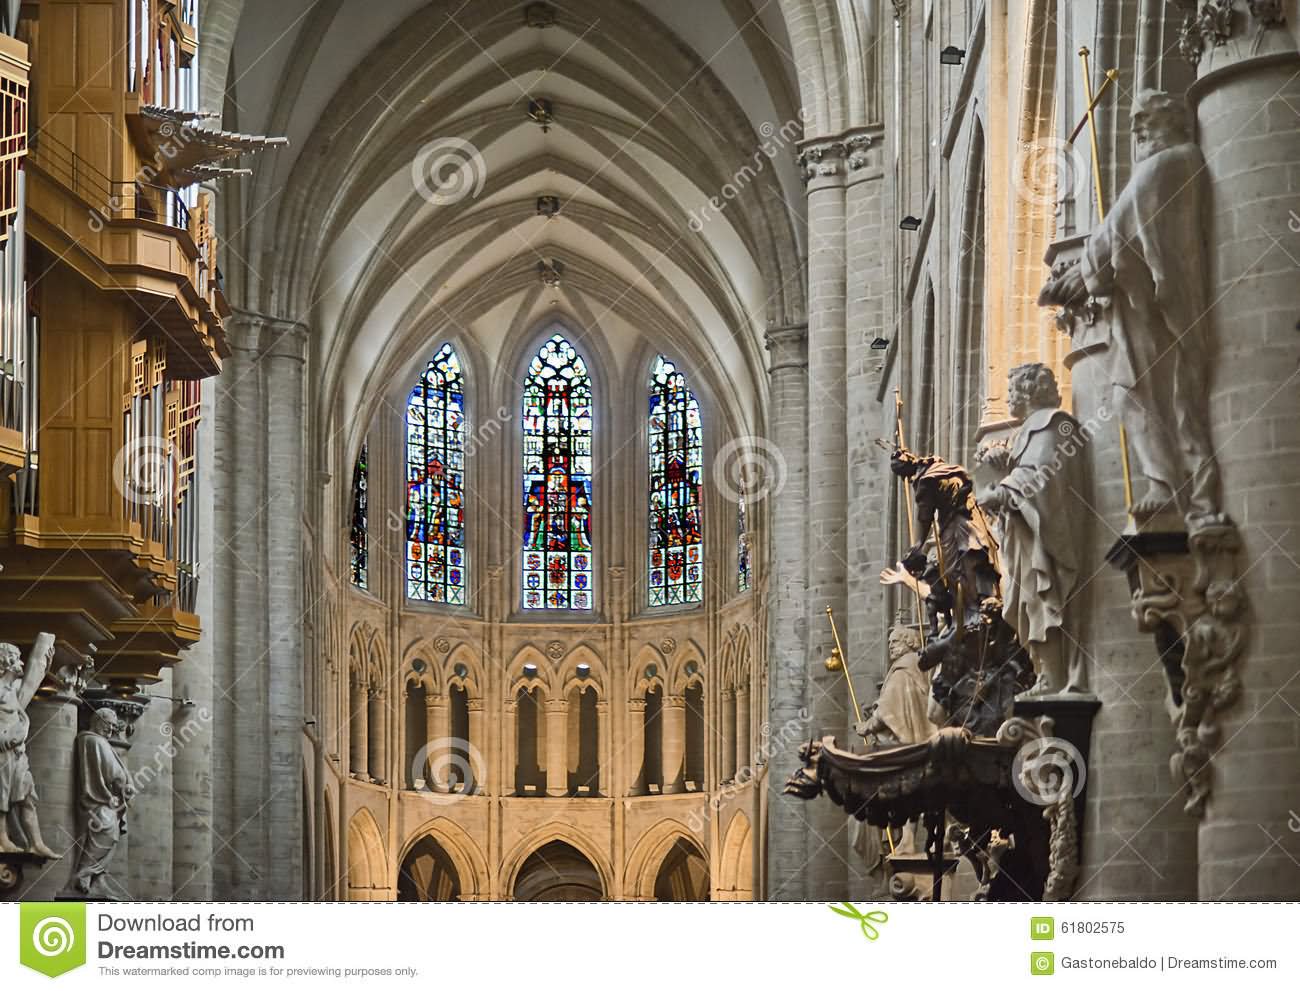 Statues On The Columns And Stained Glass Windows Inside The Cathedral of St. Michael and St. Gudula